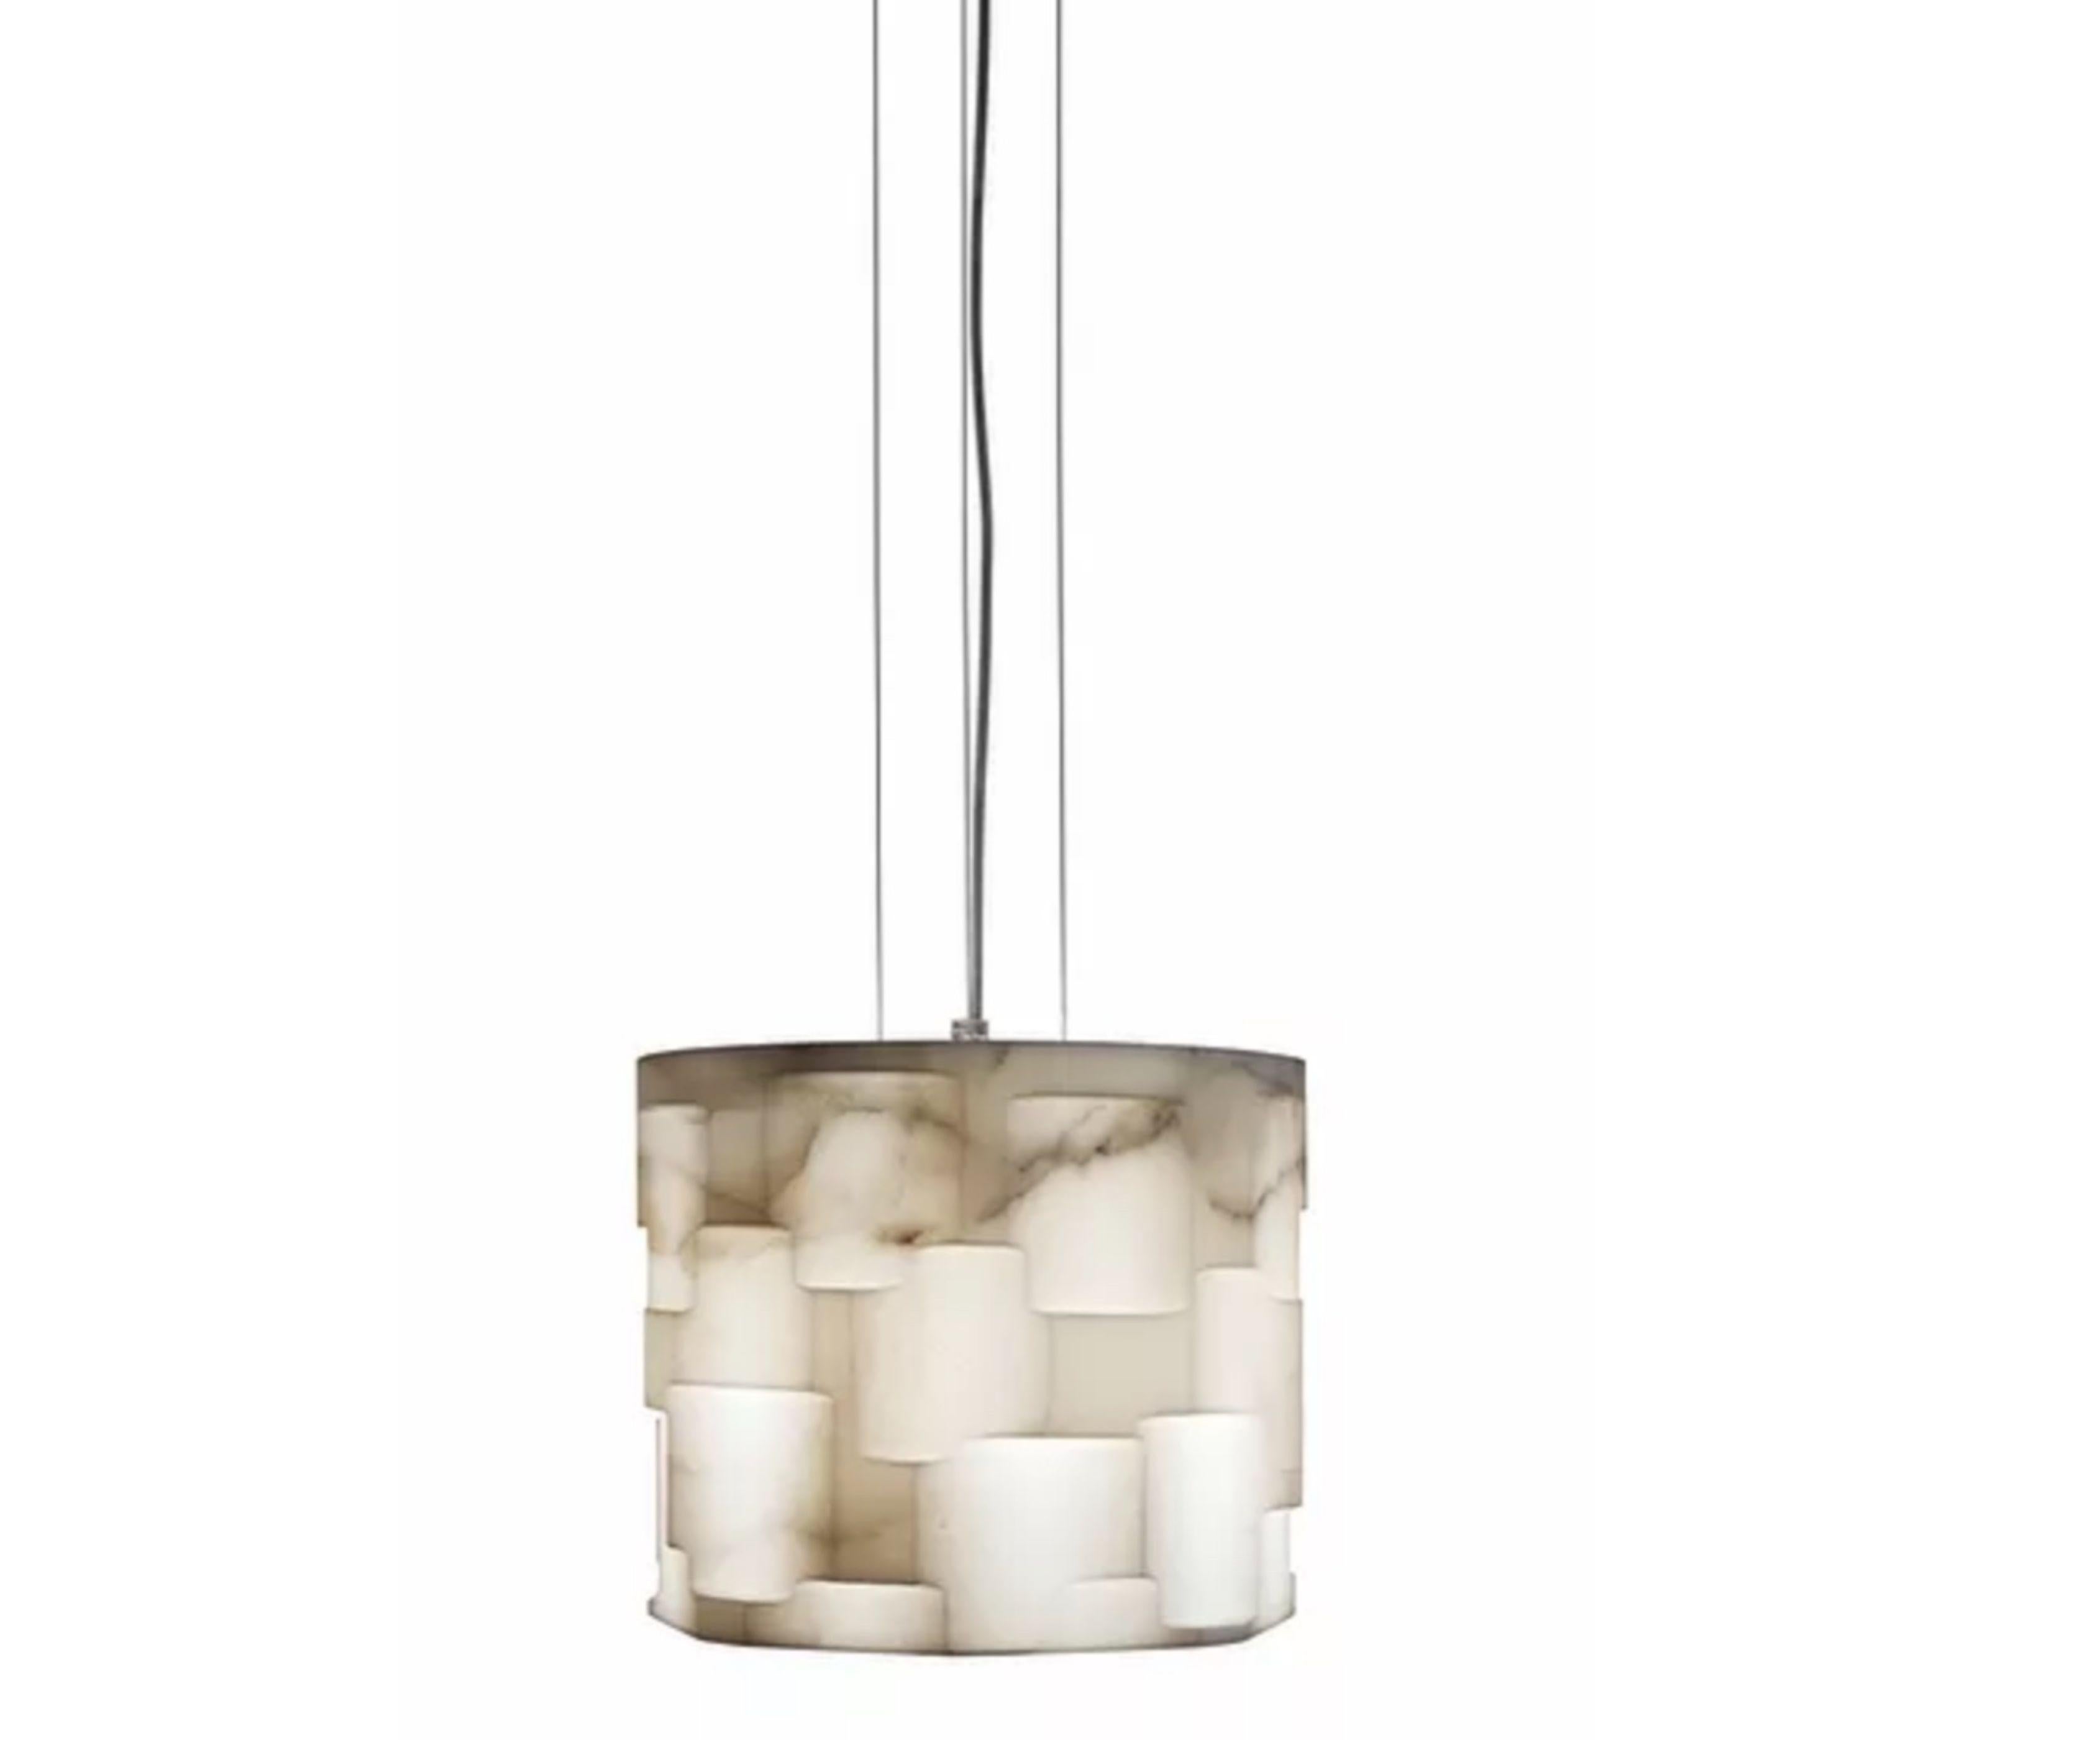 Totem big marble pendant by Marmi Serafini
Materials: Travertino Classico a foro aperto
Dimensions: ø 30.5, H 25 cm


All our lamps can be wired according to each country. If sold to the USA it will be wired for the USA for